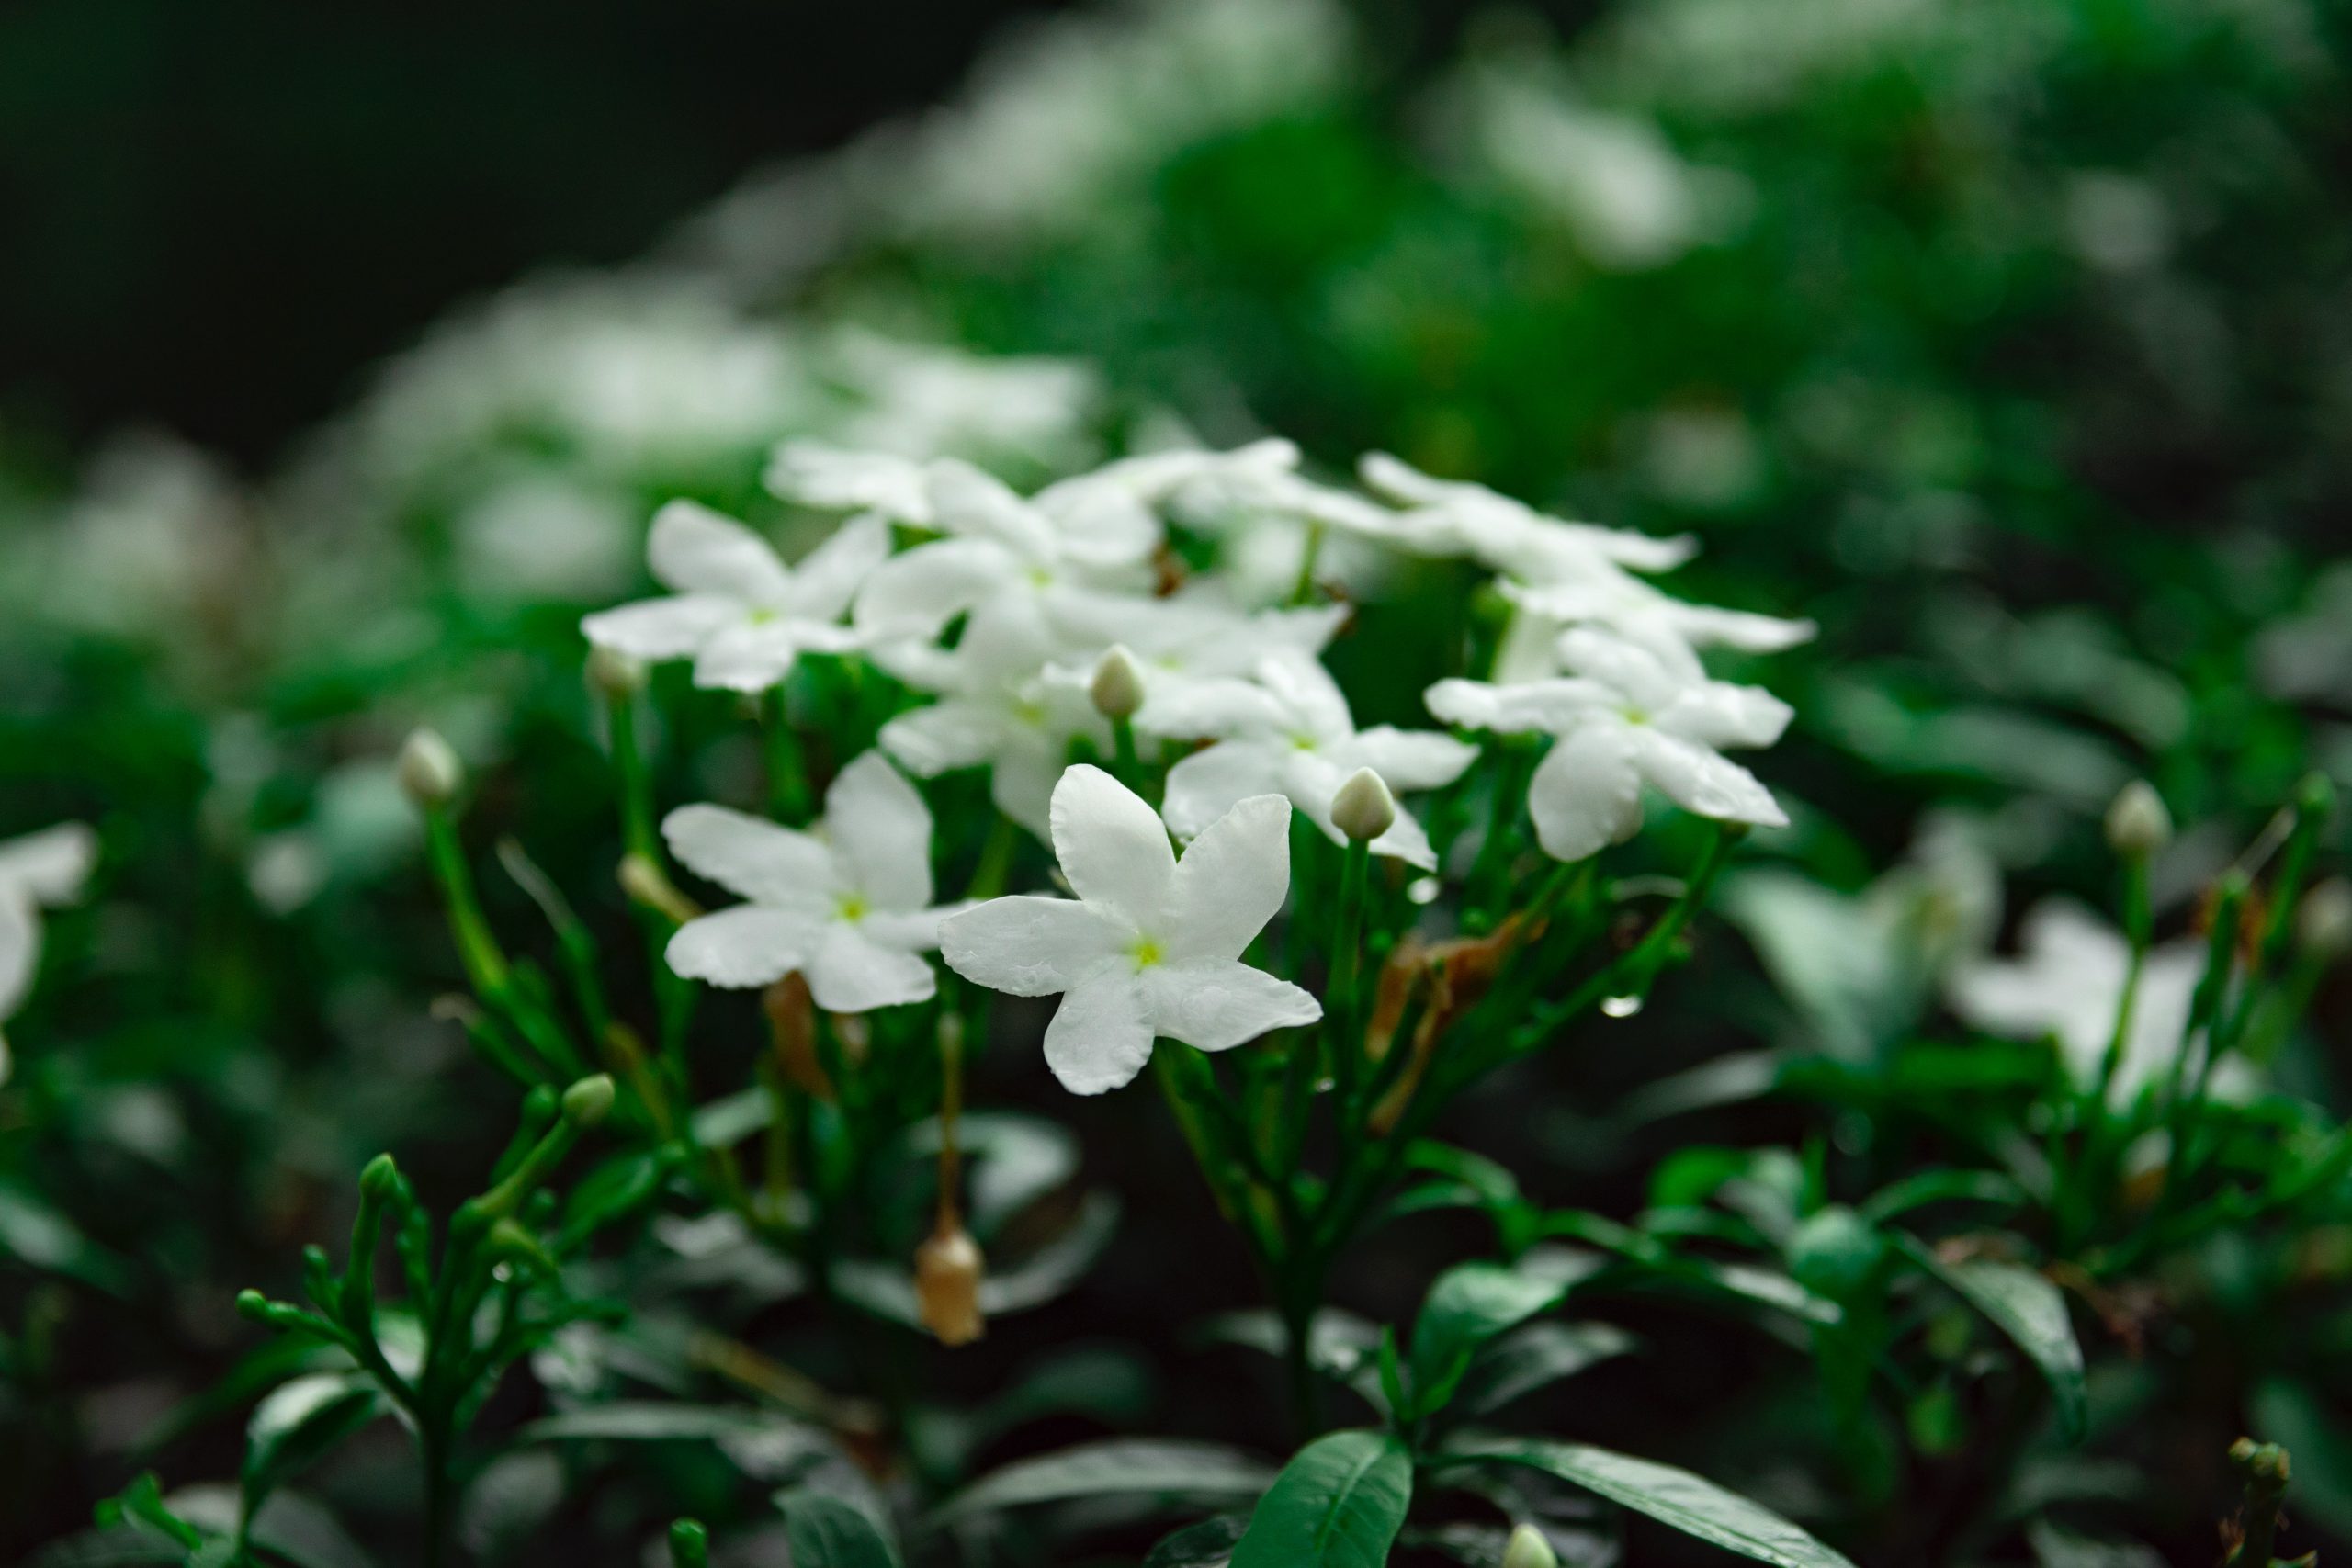 A bunch of white jasmine flowers with green leaves.